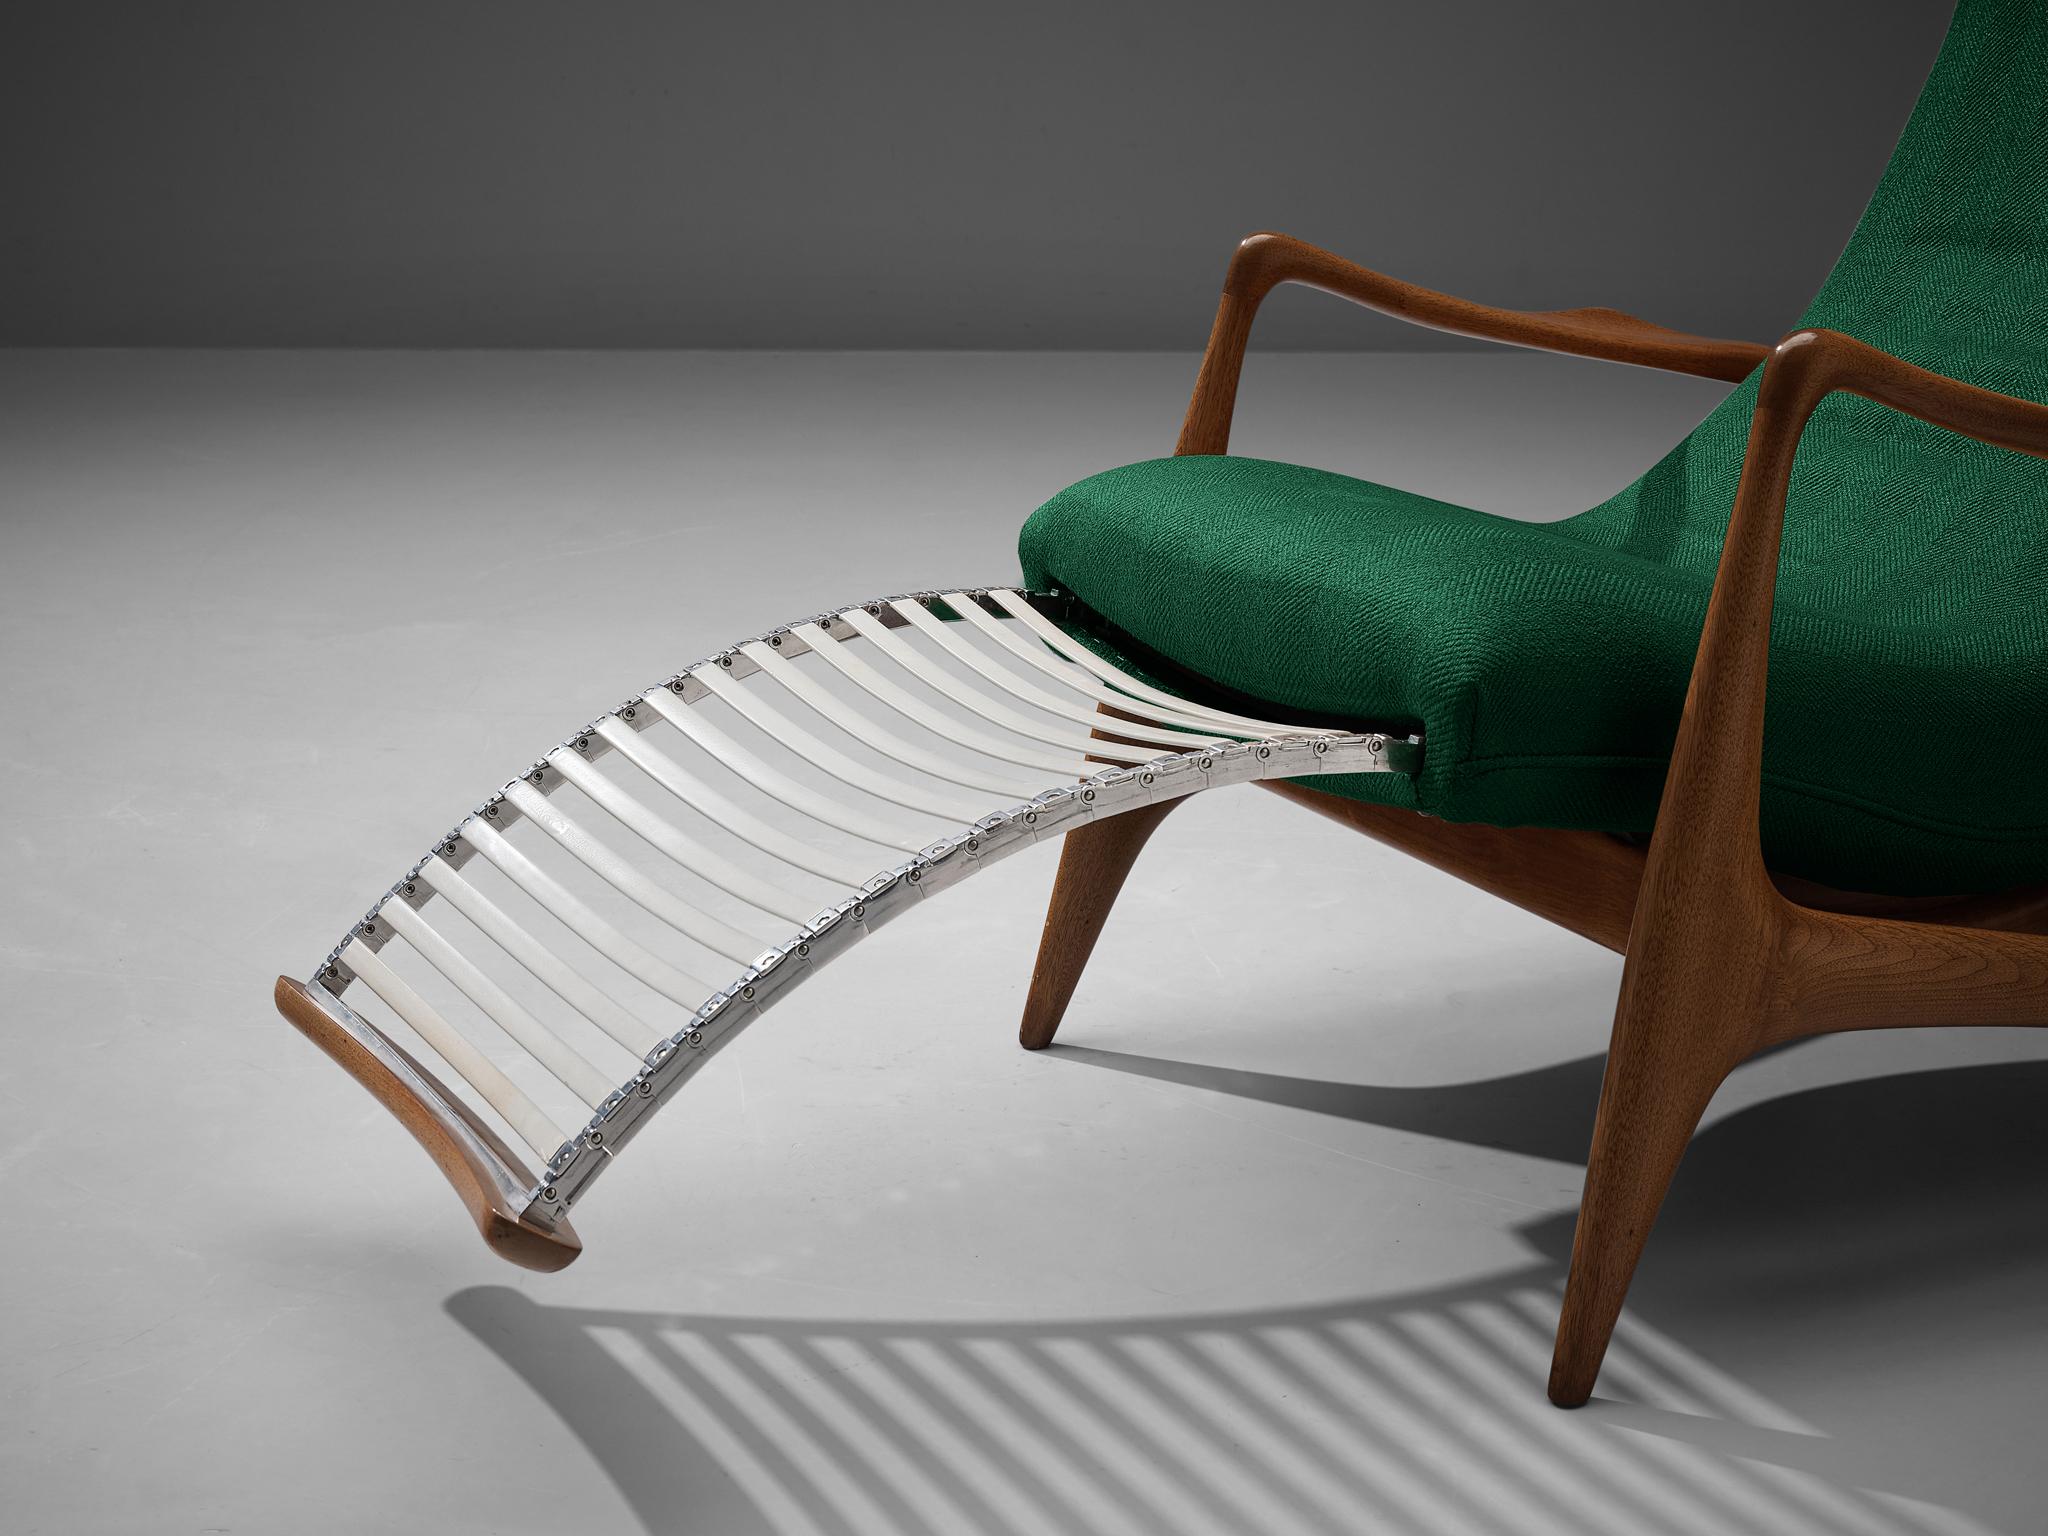 Fabric Vladimir Kagan for Dreyfuss Reclining ‘Contour’ Lounge Chair in Green Upholstery